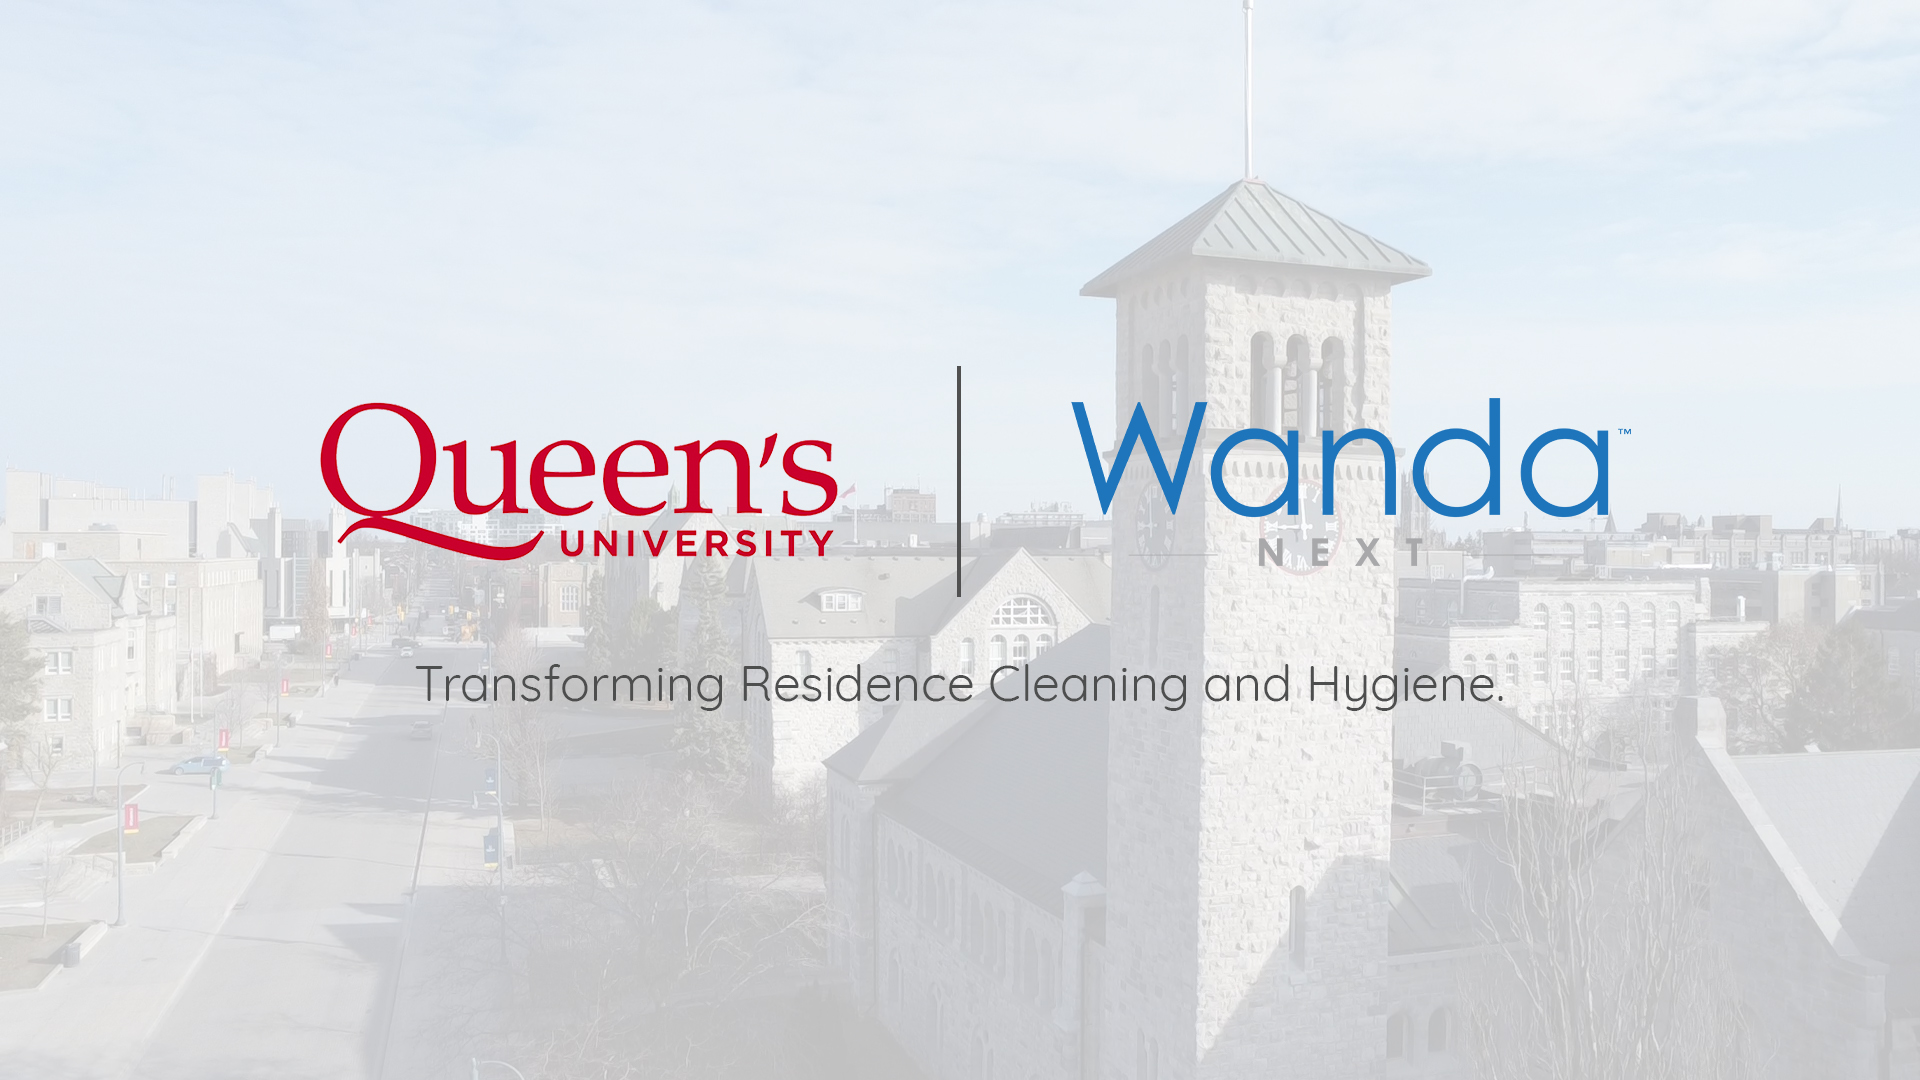 WandaNEXT | Transforming Residence Cleaning and Hygiene